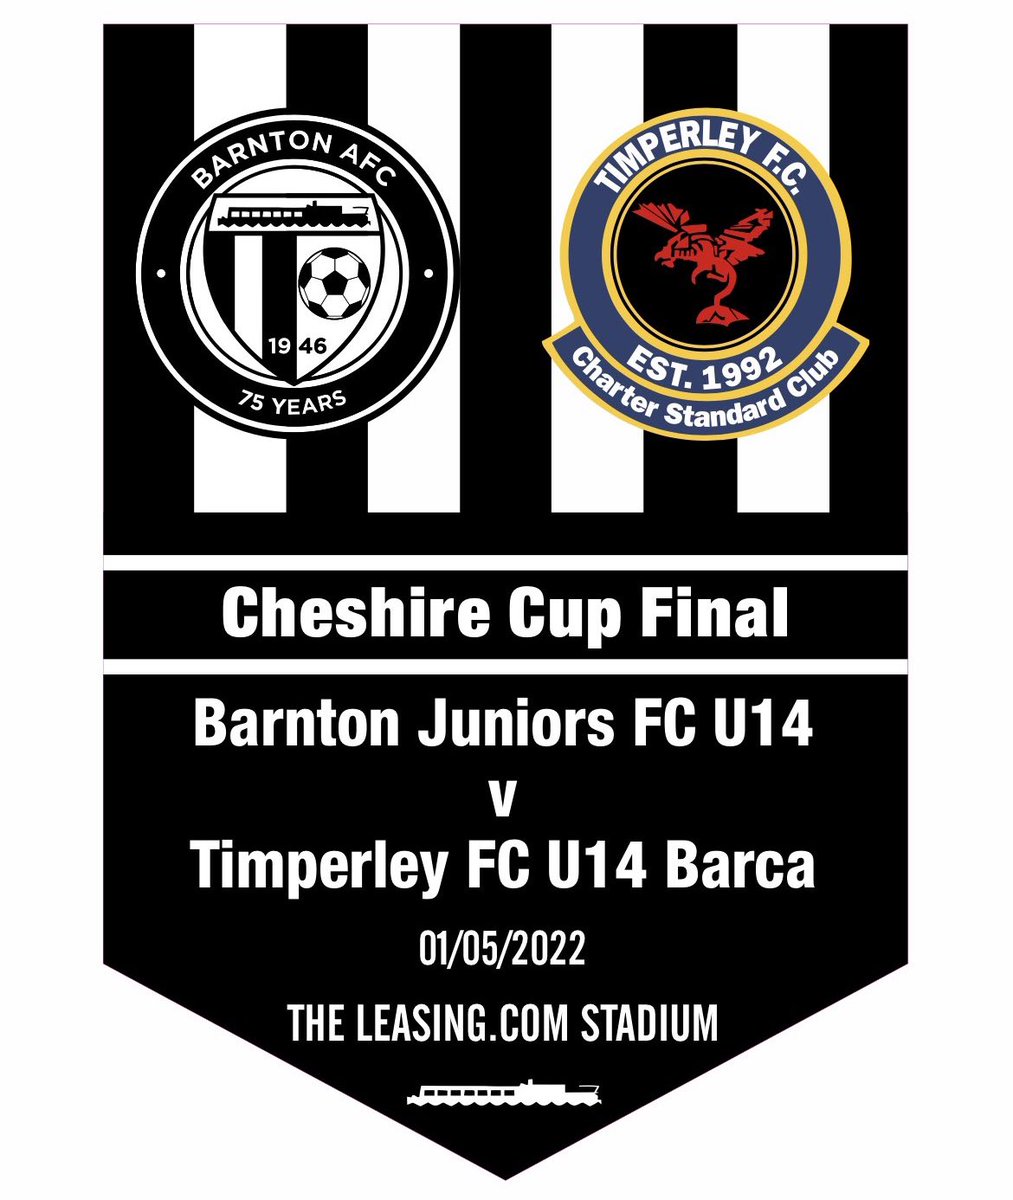 ⚫️⚪️⚫️SUNDAY⚫️⚪️⚫️ Match day 😀 It’s the BIG ONE!! 🆚 @TimperleyFC U14s 📆 Sunday 1st May ⌚️10:30ko 🏟 Leasing.com 🏆 @CCFACountyCups 🎟 £2 Adults £1 Senior Citizens & Children 🏁🏁🏁 #UPTHEVILLAGERS